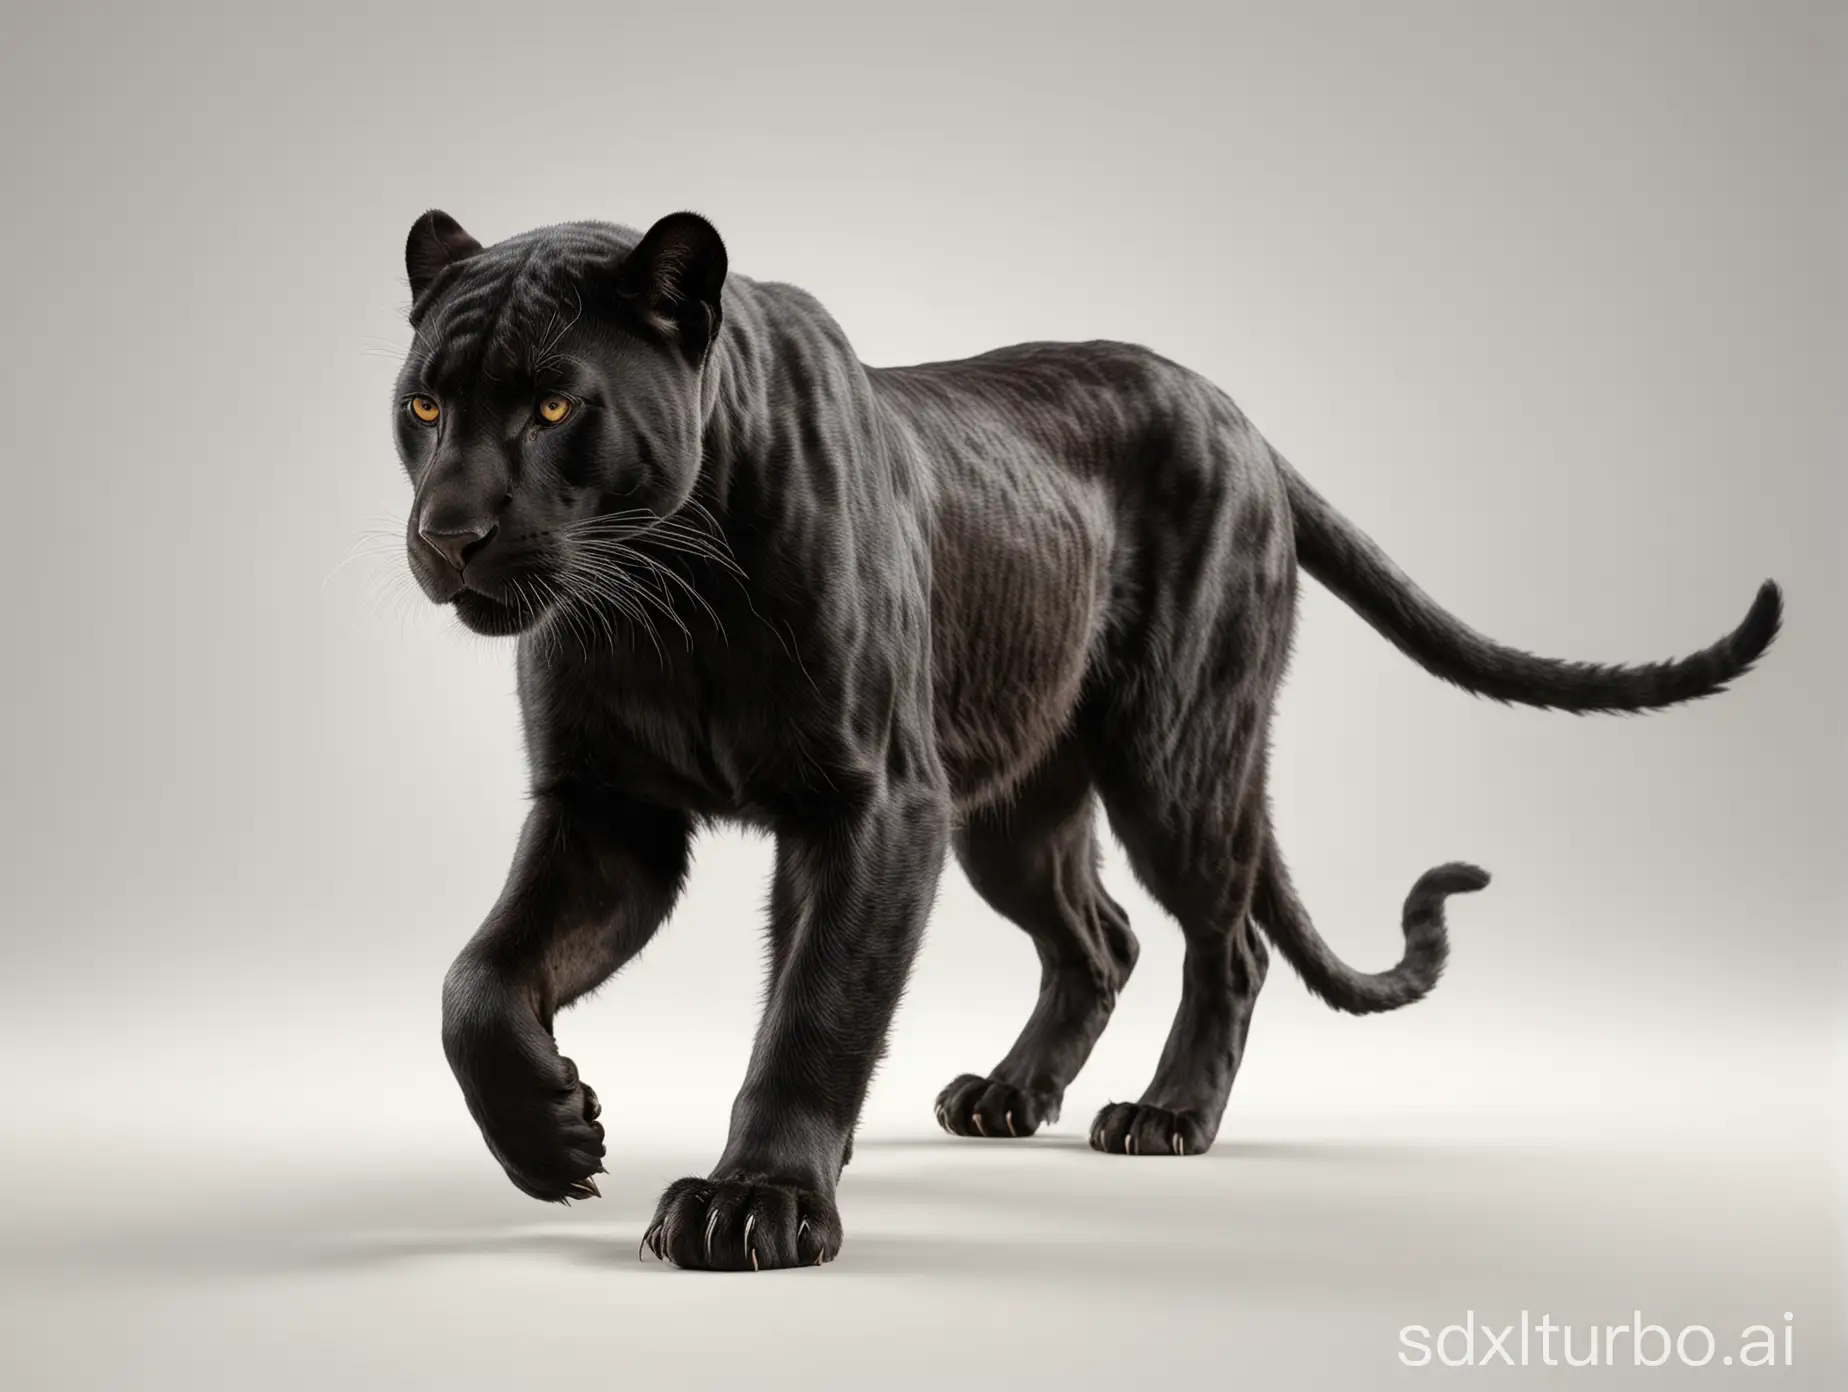 black panther walking isolated on white, side view，looking down：45degree，high resolution,masterpiece，realistic，
real body